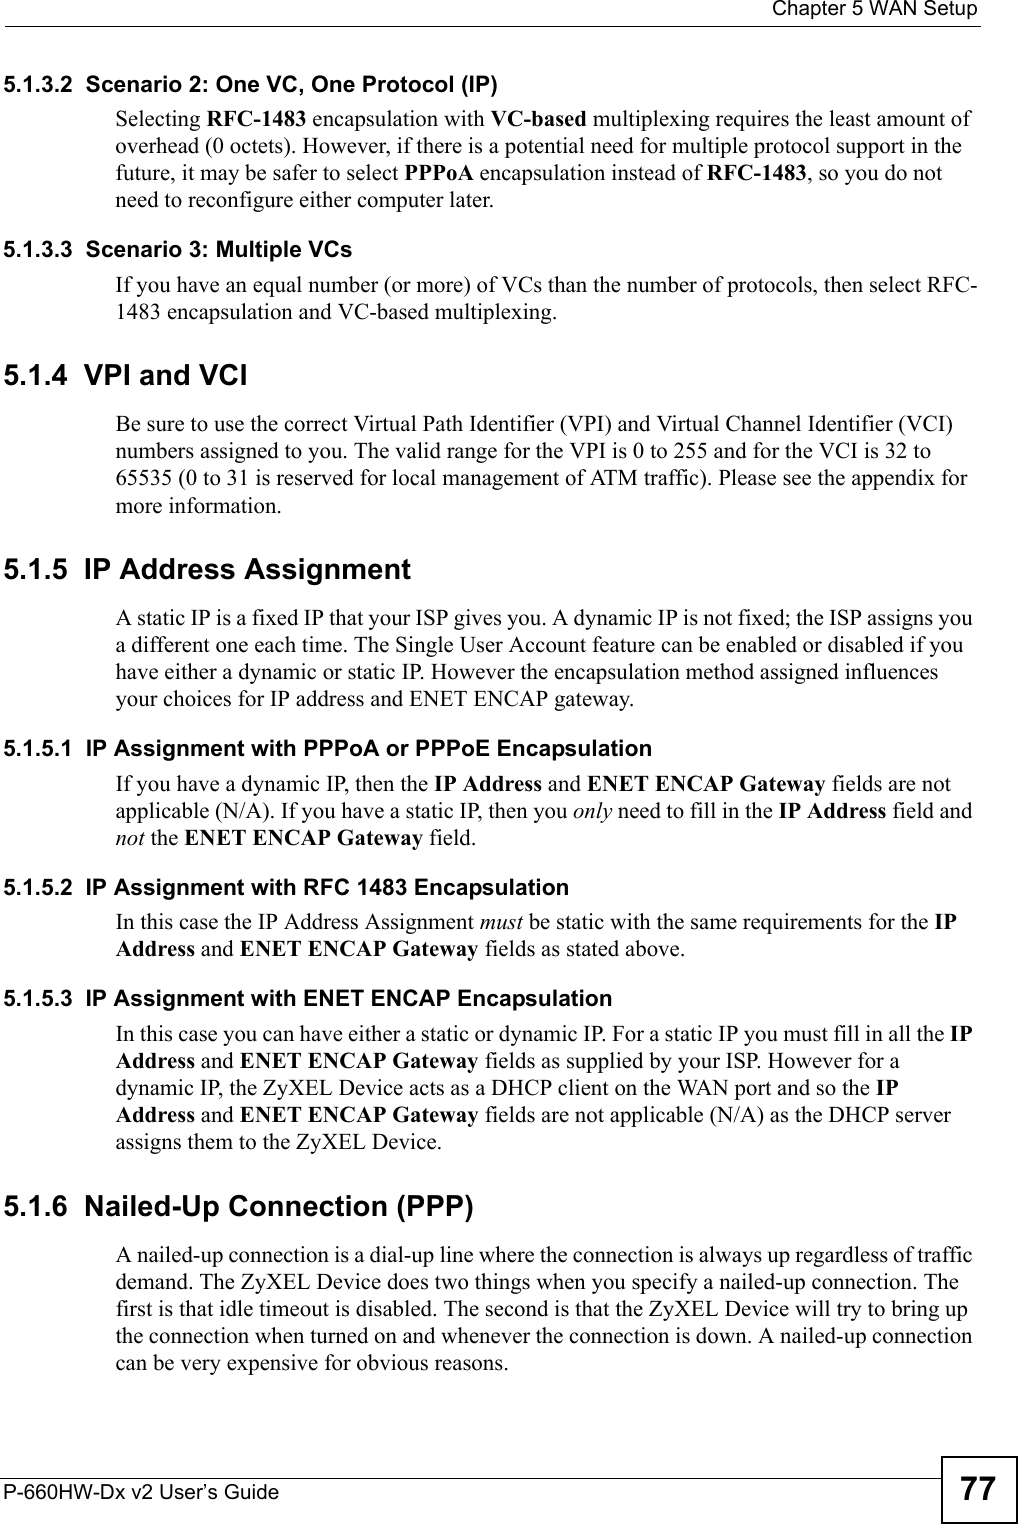  Chapter 5 WAN SetupP-660HW-Dx v2 User’s Guide 775.1.3.2  Scenario 2: One VC, One Protocol (IP)Selecting RFC-1483 encapsulation with VC-based multiplexing requires the least amount of overhead (0 octets). However, if there is a potential need for multiple protocol support in the future, it may be safer to select PPPoA encapsulation instead of RFC-1483, so you do not need to reconfigure either computer later.5.1.3.3  Scenario 3: Multiple VCsIf you have an equal number (or more) of VCs than the number of protocols, then select RFC-1483 encapsulation and VC-based multiplexing.5.1.4  VPI and VCIBe sure to use the correct Virtual Path Identifier (VPI) and Virtual Channel Identifier (VCI) numbers assigned to you. The valid range for the VPI is 0 to 255 and for the VCI is 32 to 65535 (0 to 31 is reserved for local management of ATM traffic). Please see the appendix for more information.5.1.5  IP Address AssignmentA static IP is a fixed IP that your ISP gives you. A dynamic IP is not fixed; the ISP assigns you a different one each time. The Single User Account feature can be enabled or disabled if you have either a dynamic or static IP. However the encapsulation method assigned influences your choices for IP address and ENET ENCAP gateway.5.1.5.1  IP Assignment with PPPoA or PPPoE EncapsulationIf you have a dynamic IP, then the IP Address and ENET ENCAP Gateway fields are not applicable (N/A). If you have a static IP, then you only need to fill in the IP Address field and not the ENET ENCAP Gateway field.5.1.5.2  IP Assignment with RFC 1483 EncapsulationIn this case the IP Address Assignment must be static with the same requirements for the IP Address and ENET ENCAP Gateway fields as stated above.5.1.5.3  IP Assignment with ENET ENCAP EncapsulationIn this case you can have either a static or dynamic IP. For a static IP you must fill in all the IP Address and ENET ENCAP Gateway fields as supplied by your ISP. However for a dynamic IP, the ZyXEL Device acts as a DHCP client on the WAN port and so the IP Address and ENET ENCAP Gateway fields are not applicable (N/A) as the DHCP server assigns them to the ZyXEL Device.5.1.6  Nailed-Up Connection (PPP)A nailed-up connection is a dial-up line where the connection is always up regardless of traffic demand. The ZyXEL Device does two things when you specify a nailed-up connection. The first is that idle timeout is disabled. The second is that the ZyXEL Device will try to bring up the connection when turned on and whenever the connection is down. A nailed-up connection can be very expensive for obvious reasons. 